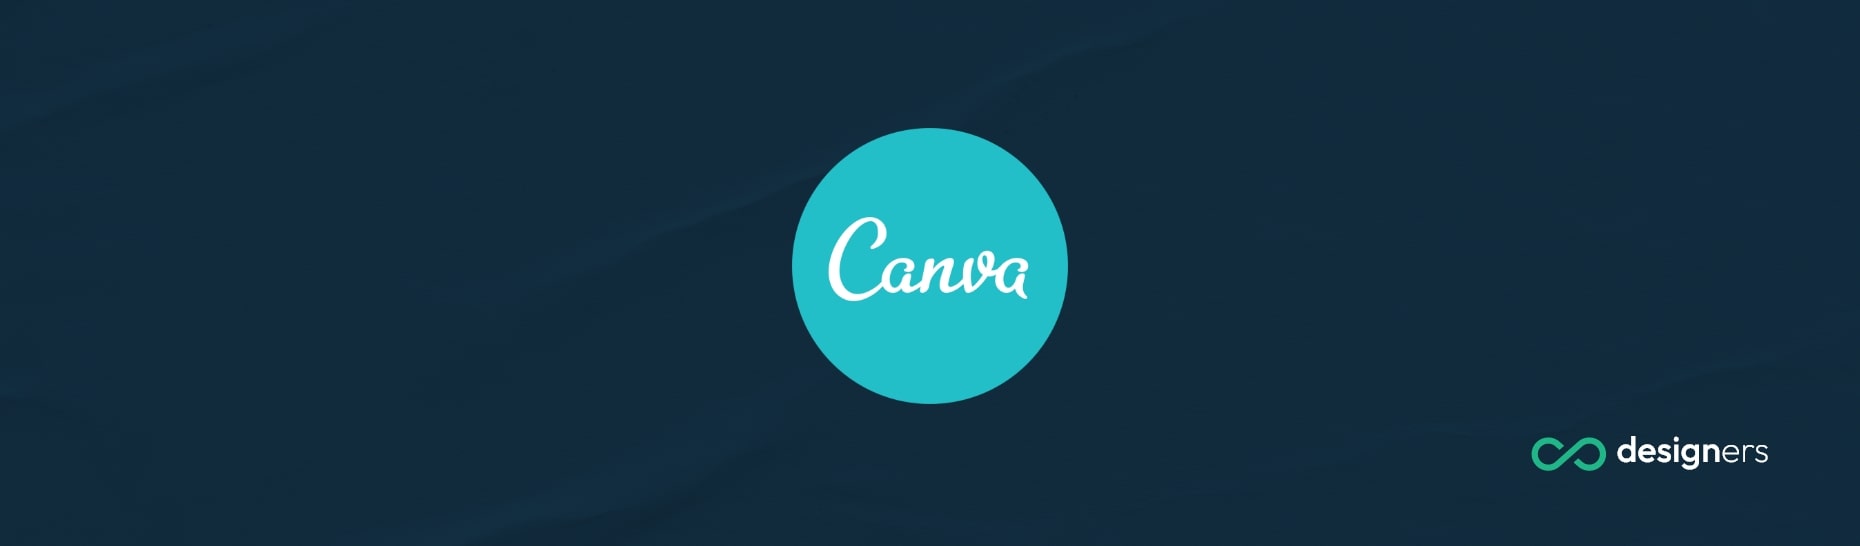 Can I Use Canva Images in My Book?